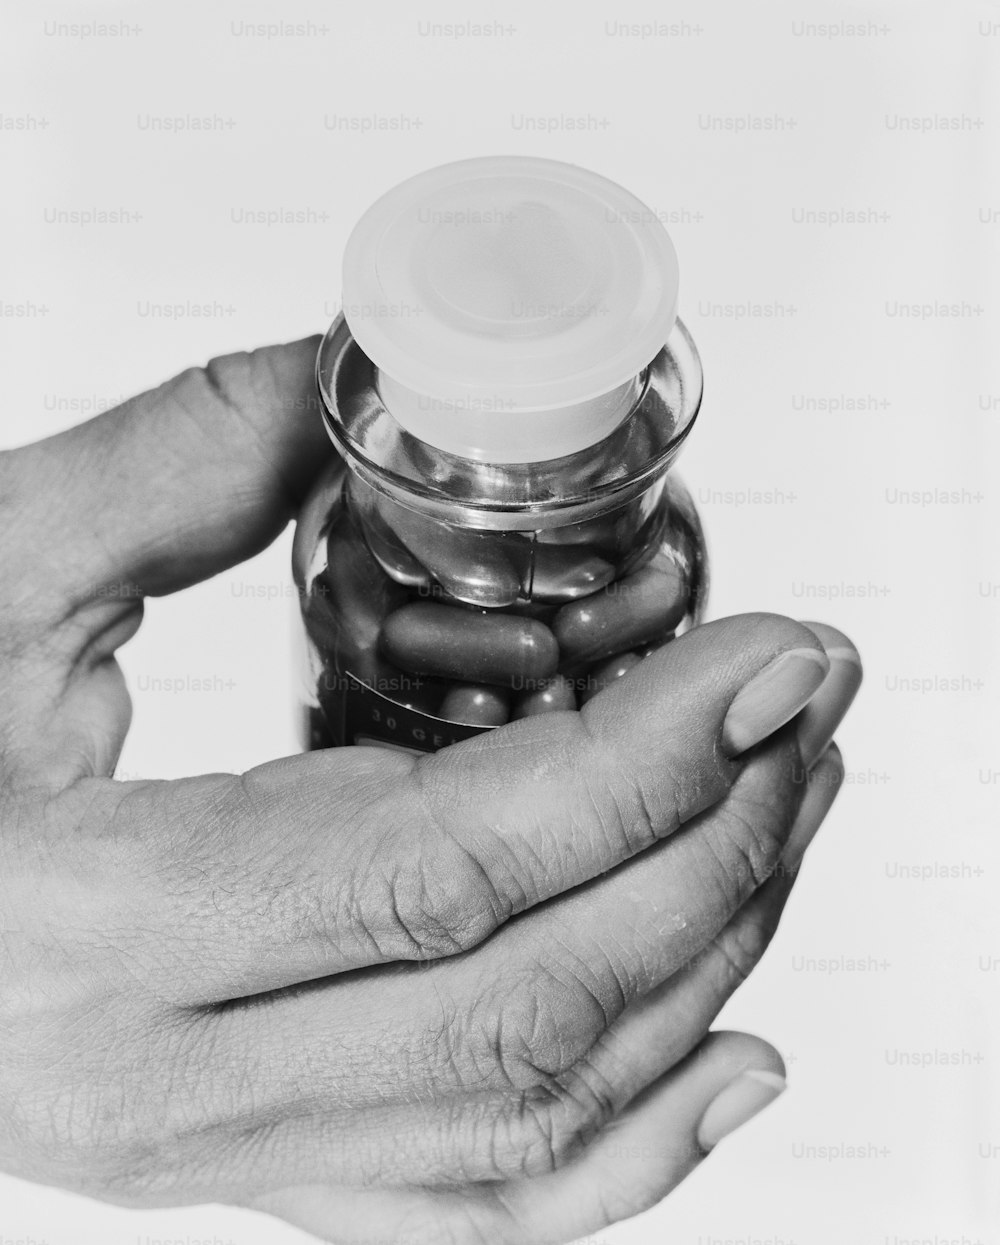 a black and white photo of two hands holding a jar of pills